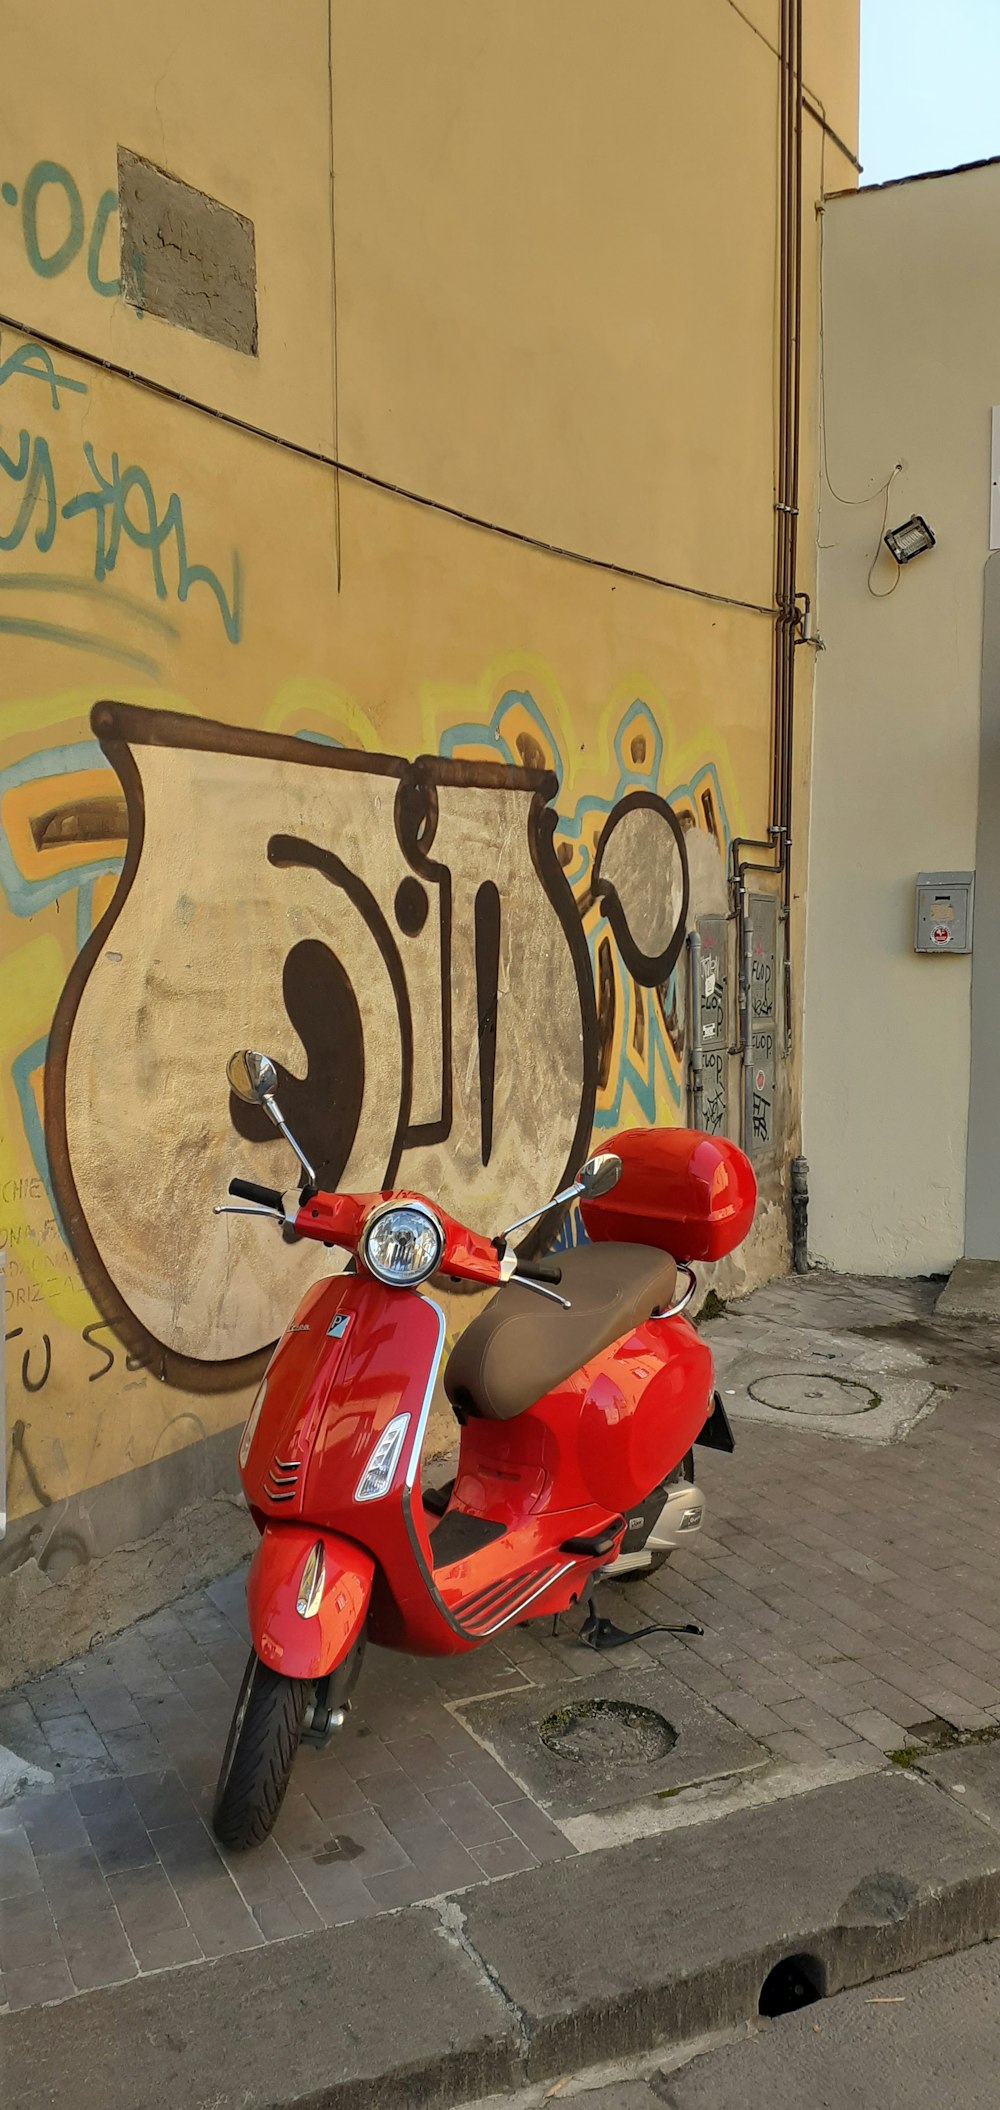 red motor scooter parked on pavement